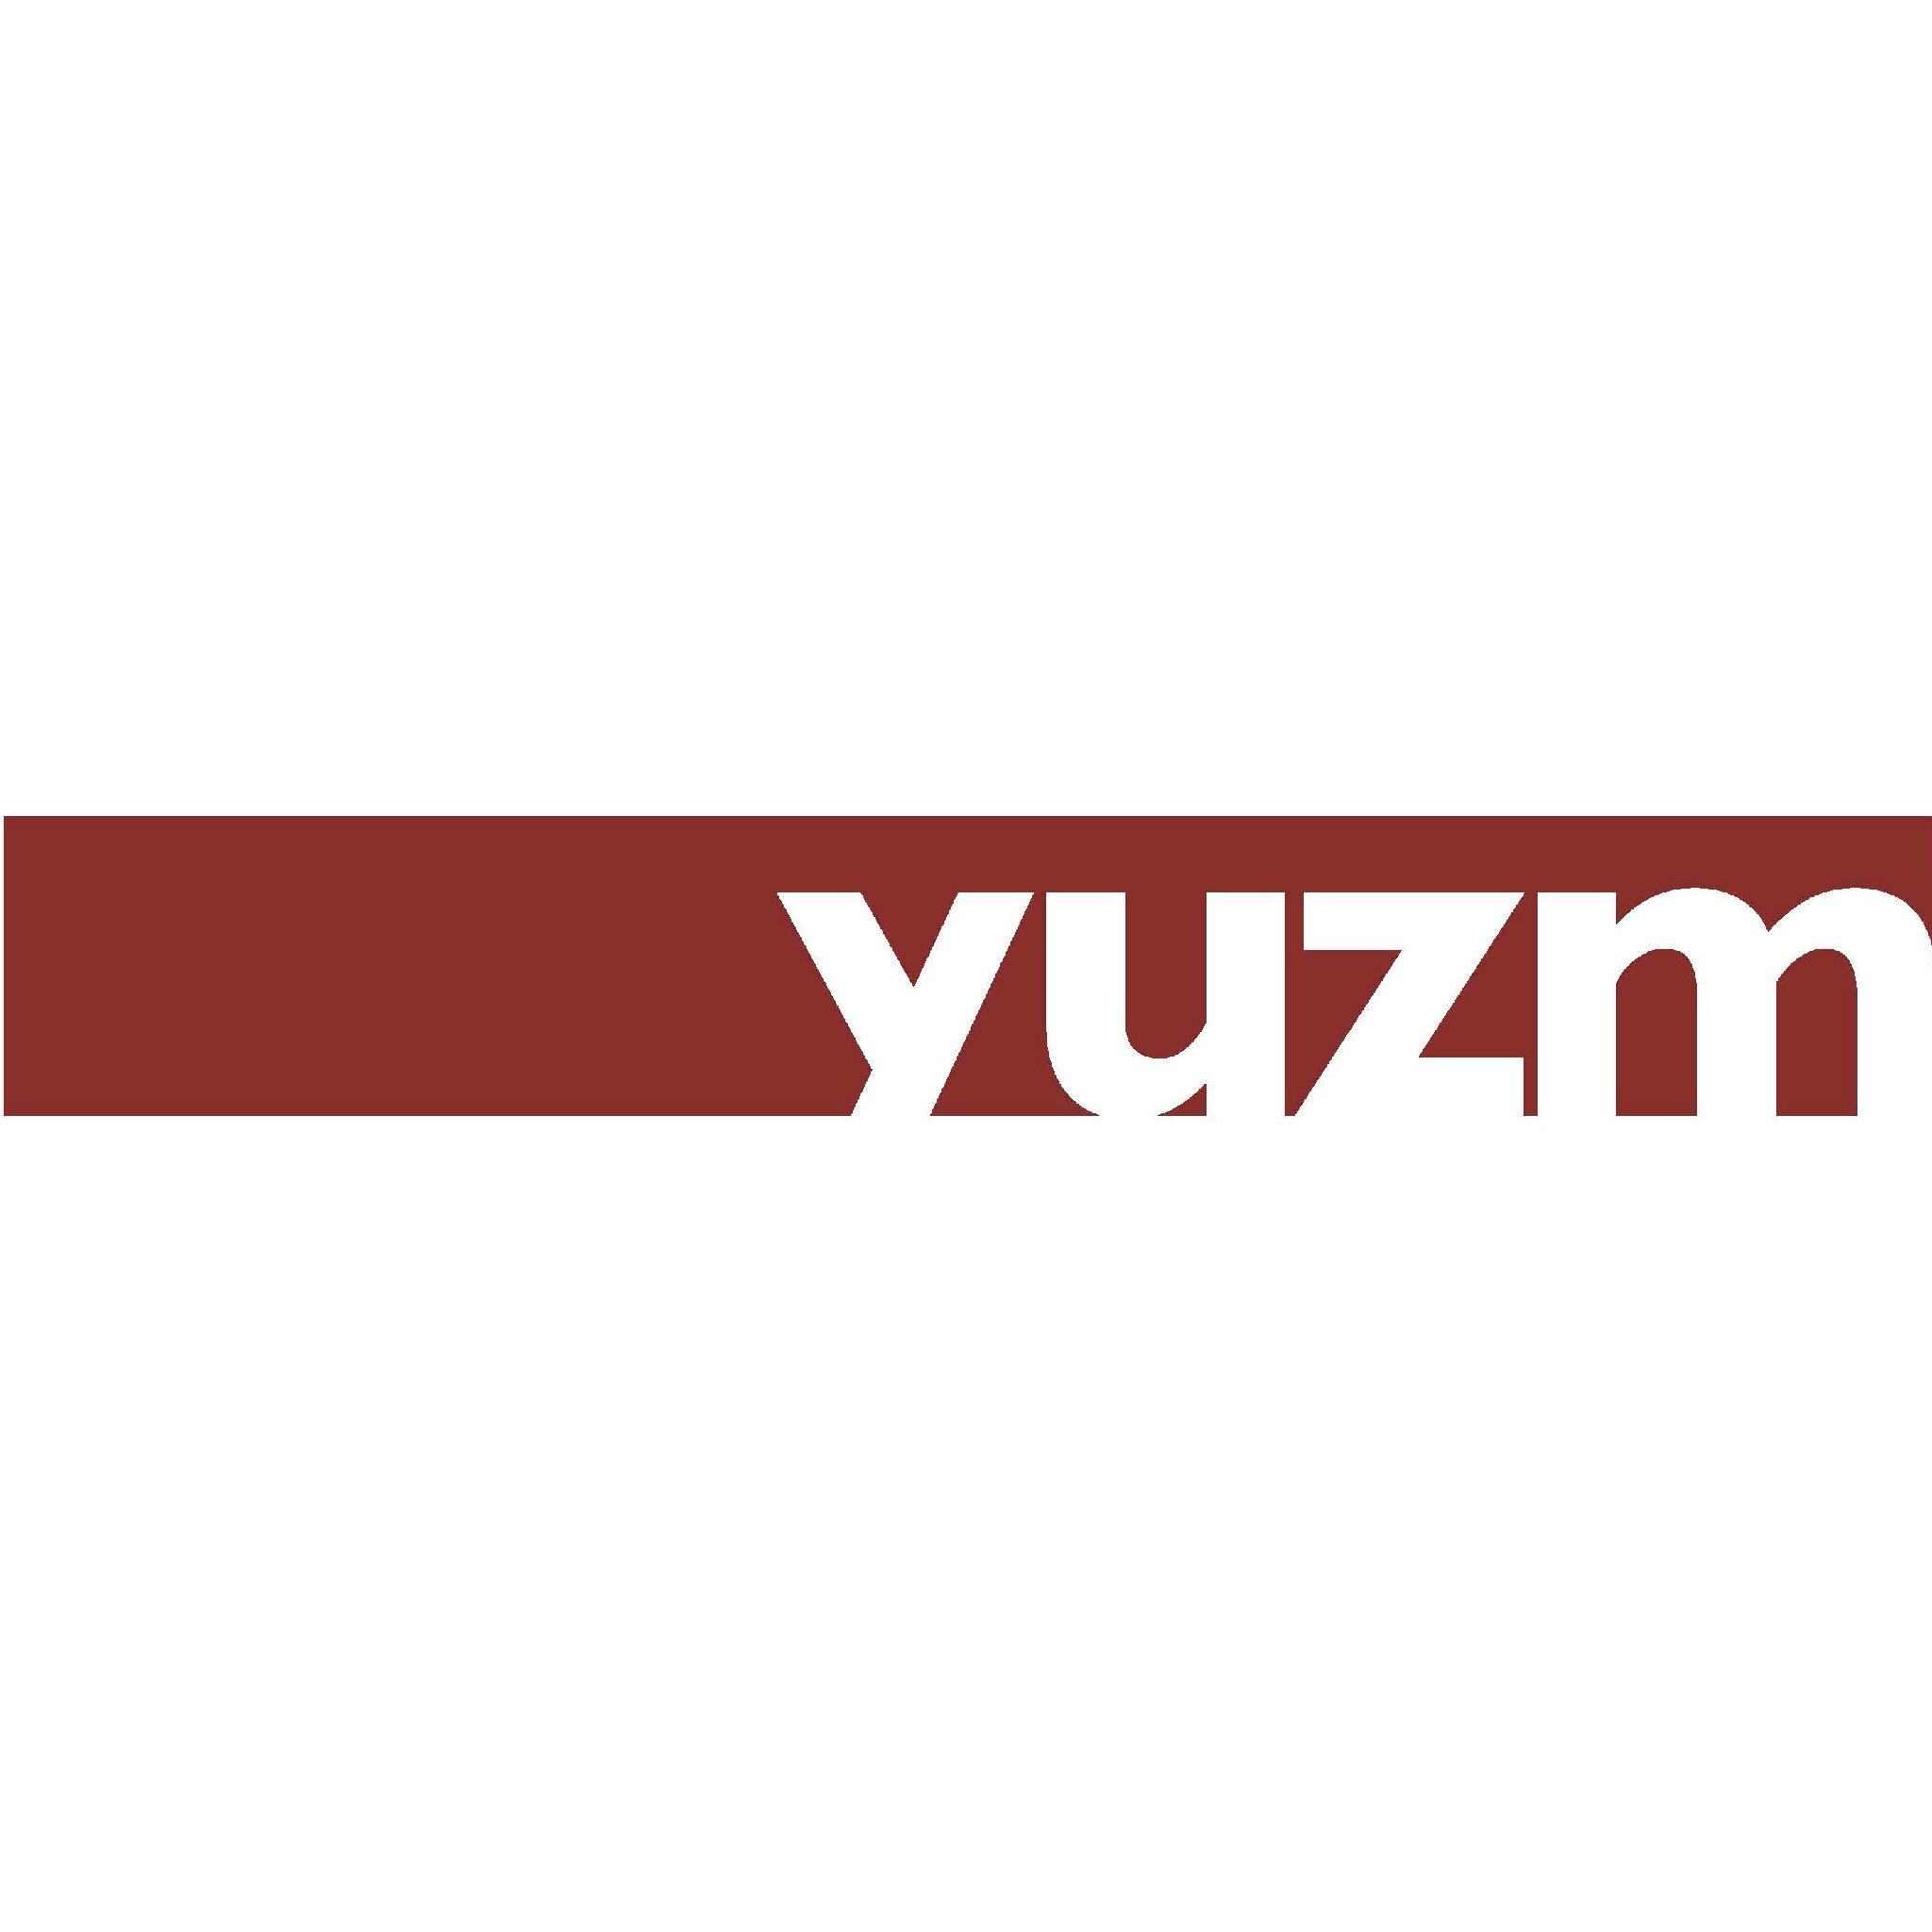 Located along the West Bund in Xuhui District, Shanghai. Yuz Museum is a non-profit organization under the umbrella of the Yuz Foundation.